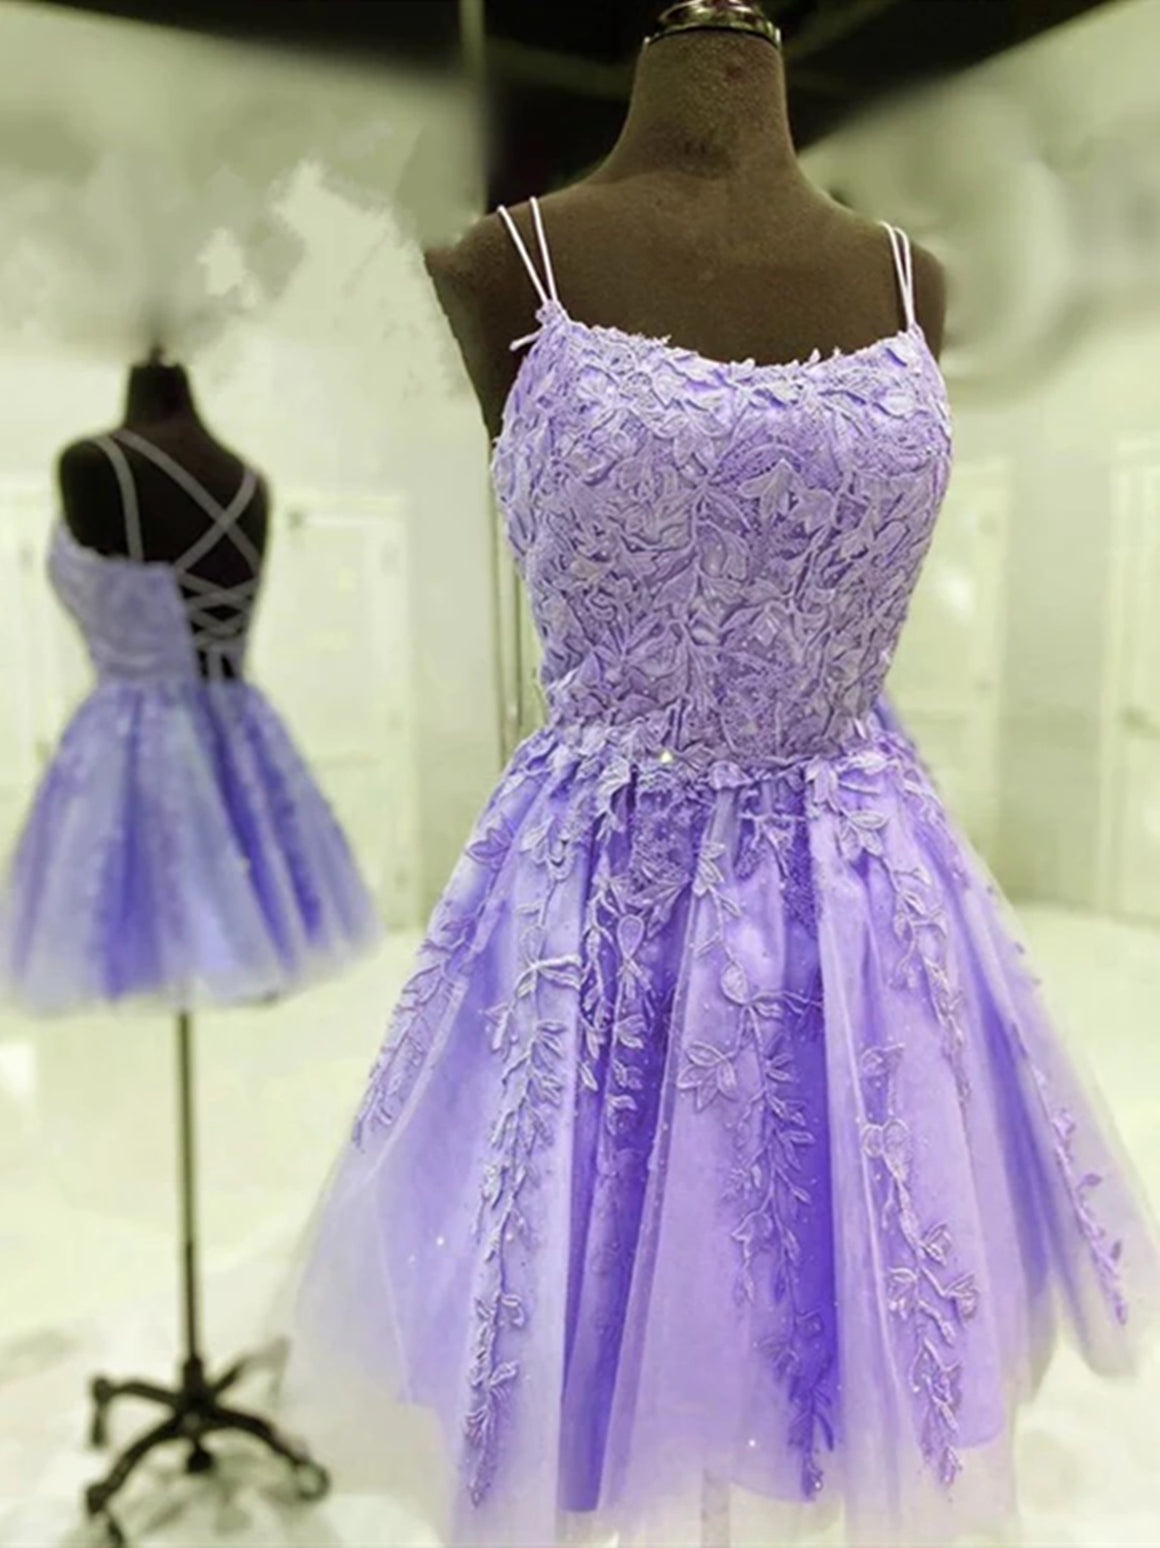 Short Backless Lace Prom Dresses, Short Backless Purple Lace Formal Homecoming Dresses